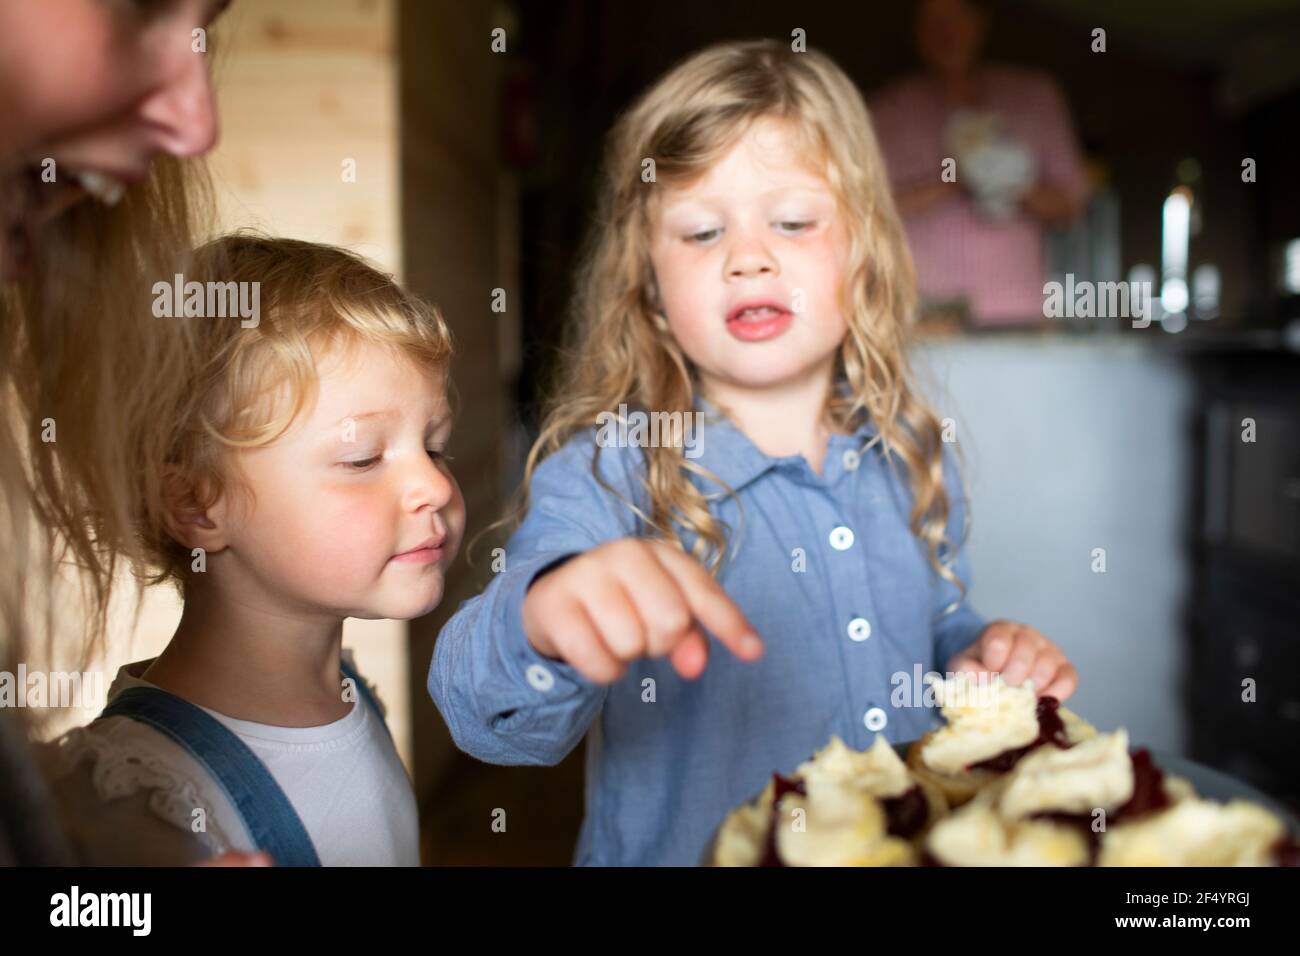 Sisters looking at sweet pastries on plate Stock Photo